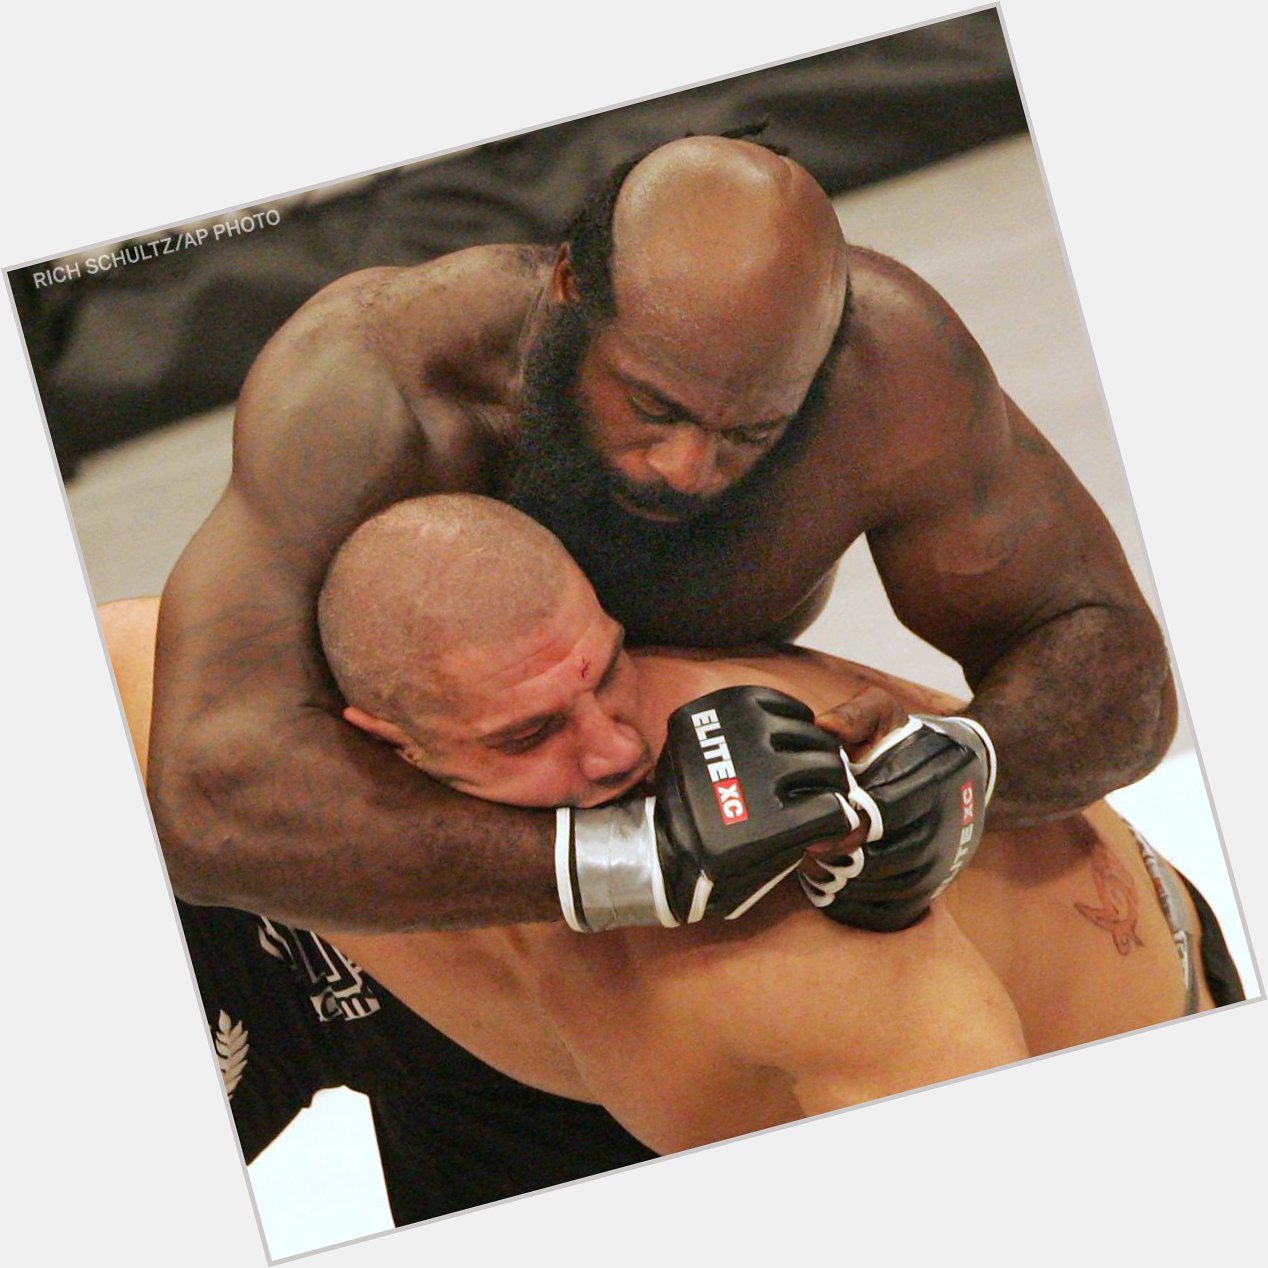 Happy birthday to one of idols and inspirations to fight the late legend kimbo slice 